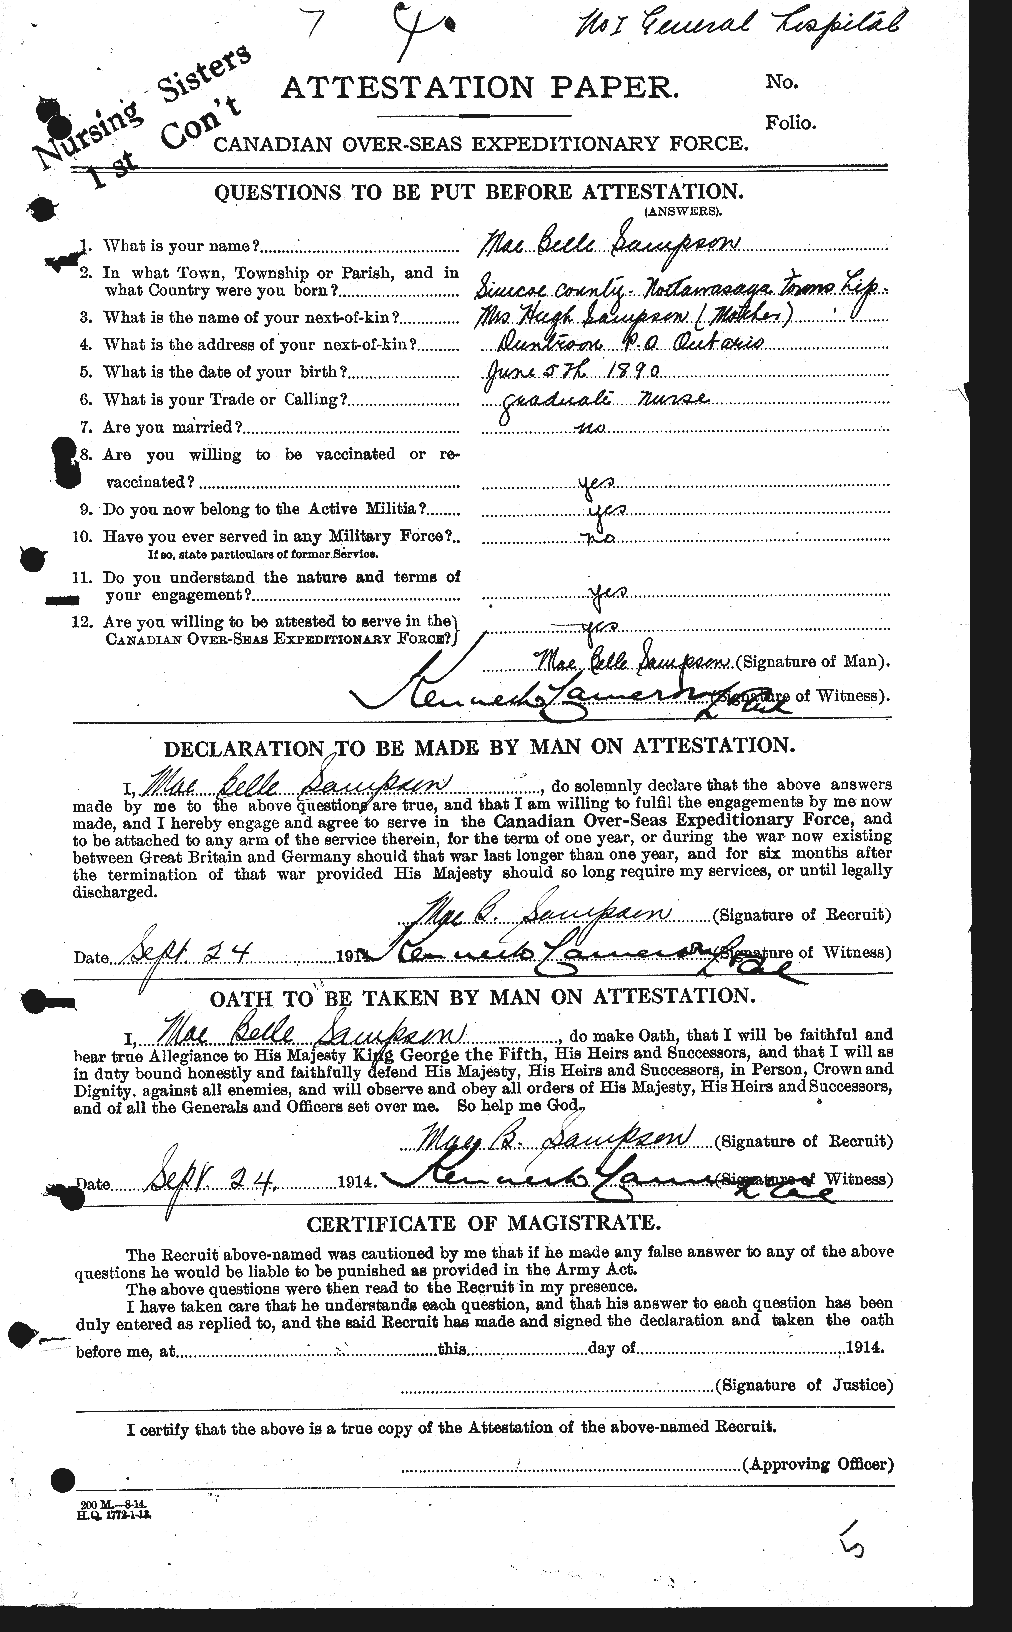 Personnel Records of the First World War - CEF 237317a